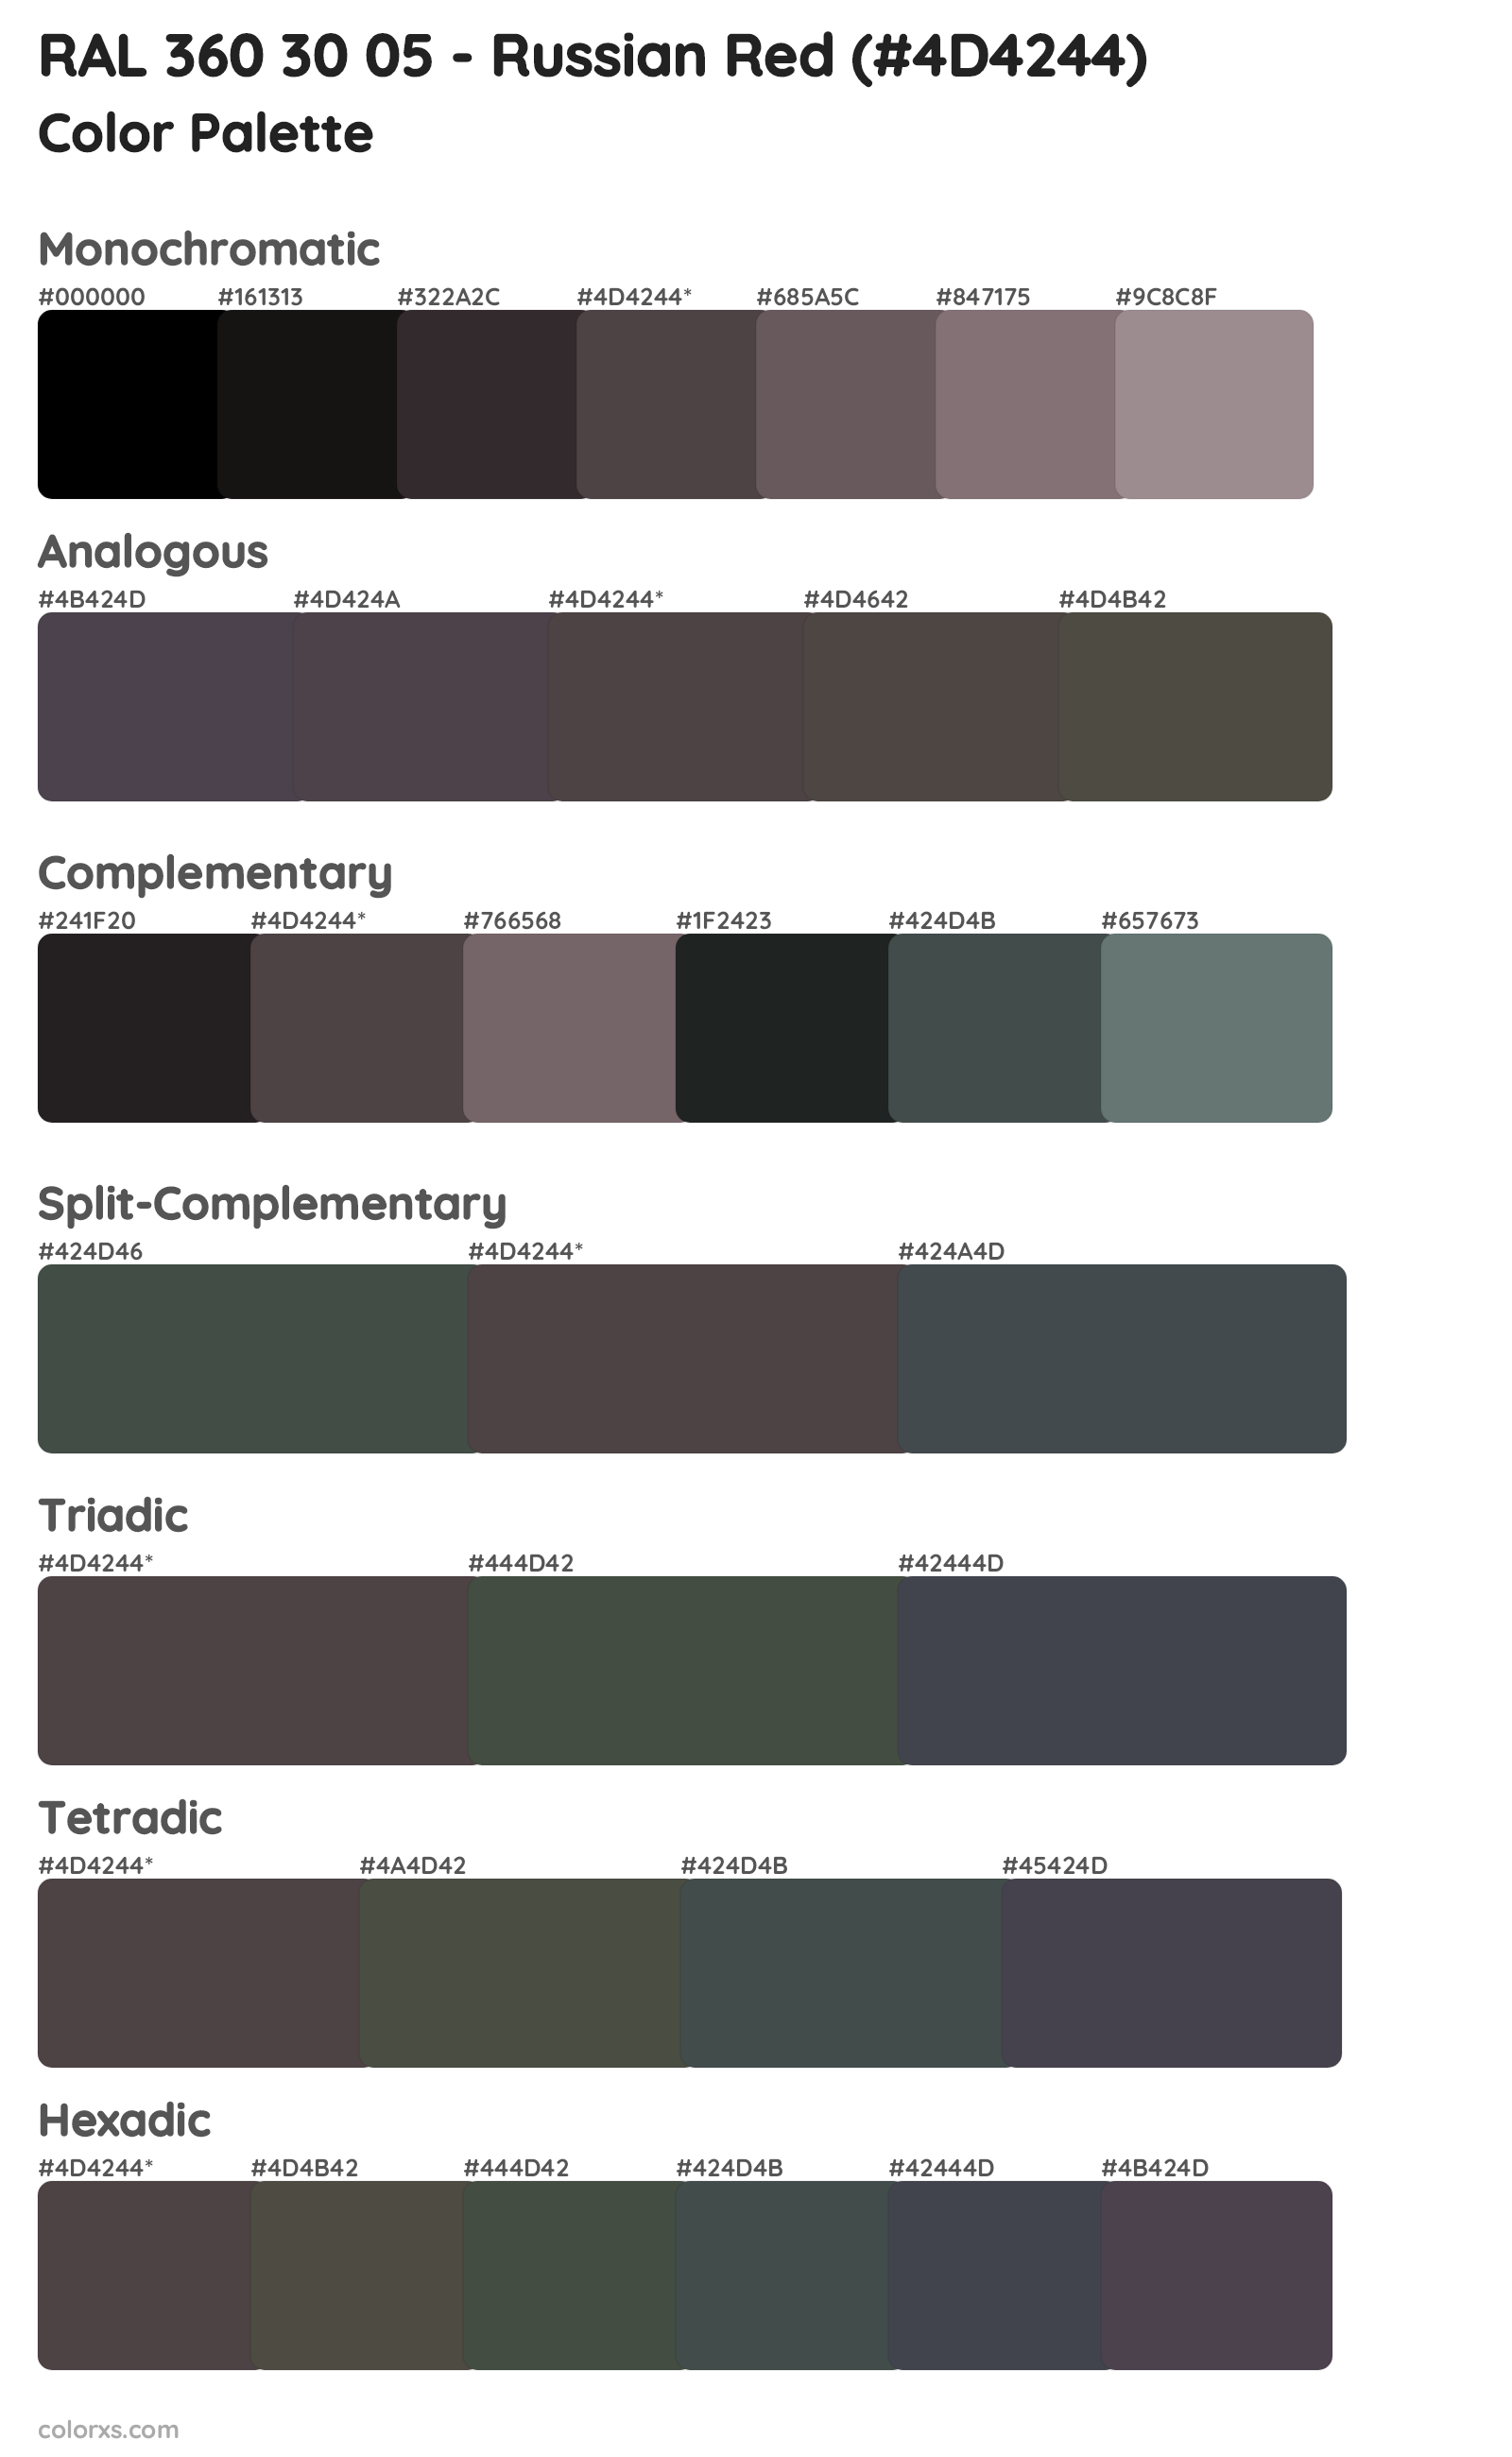 RAL 360 30 05 - Russian Red Color Scheme Palettes